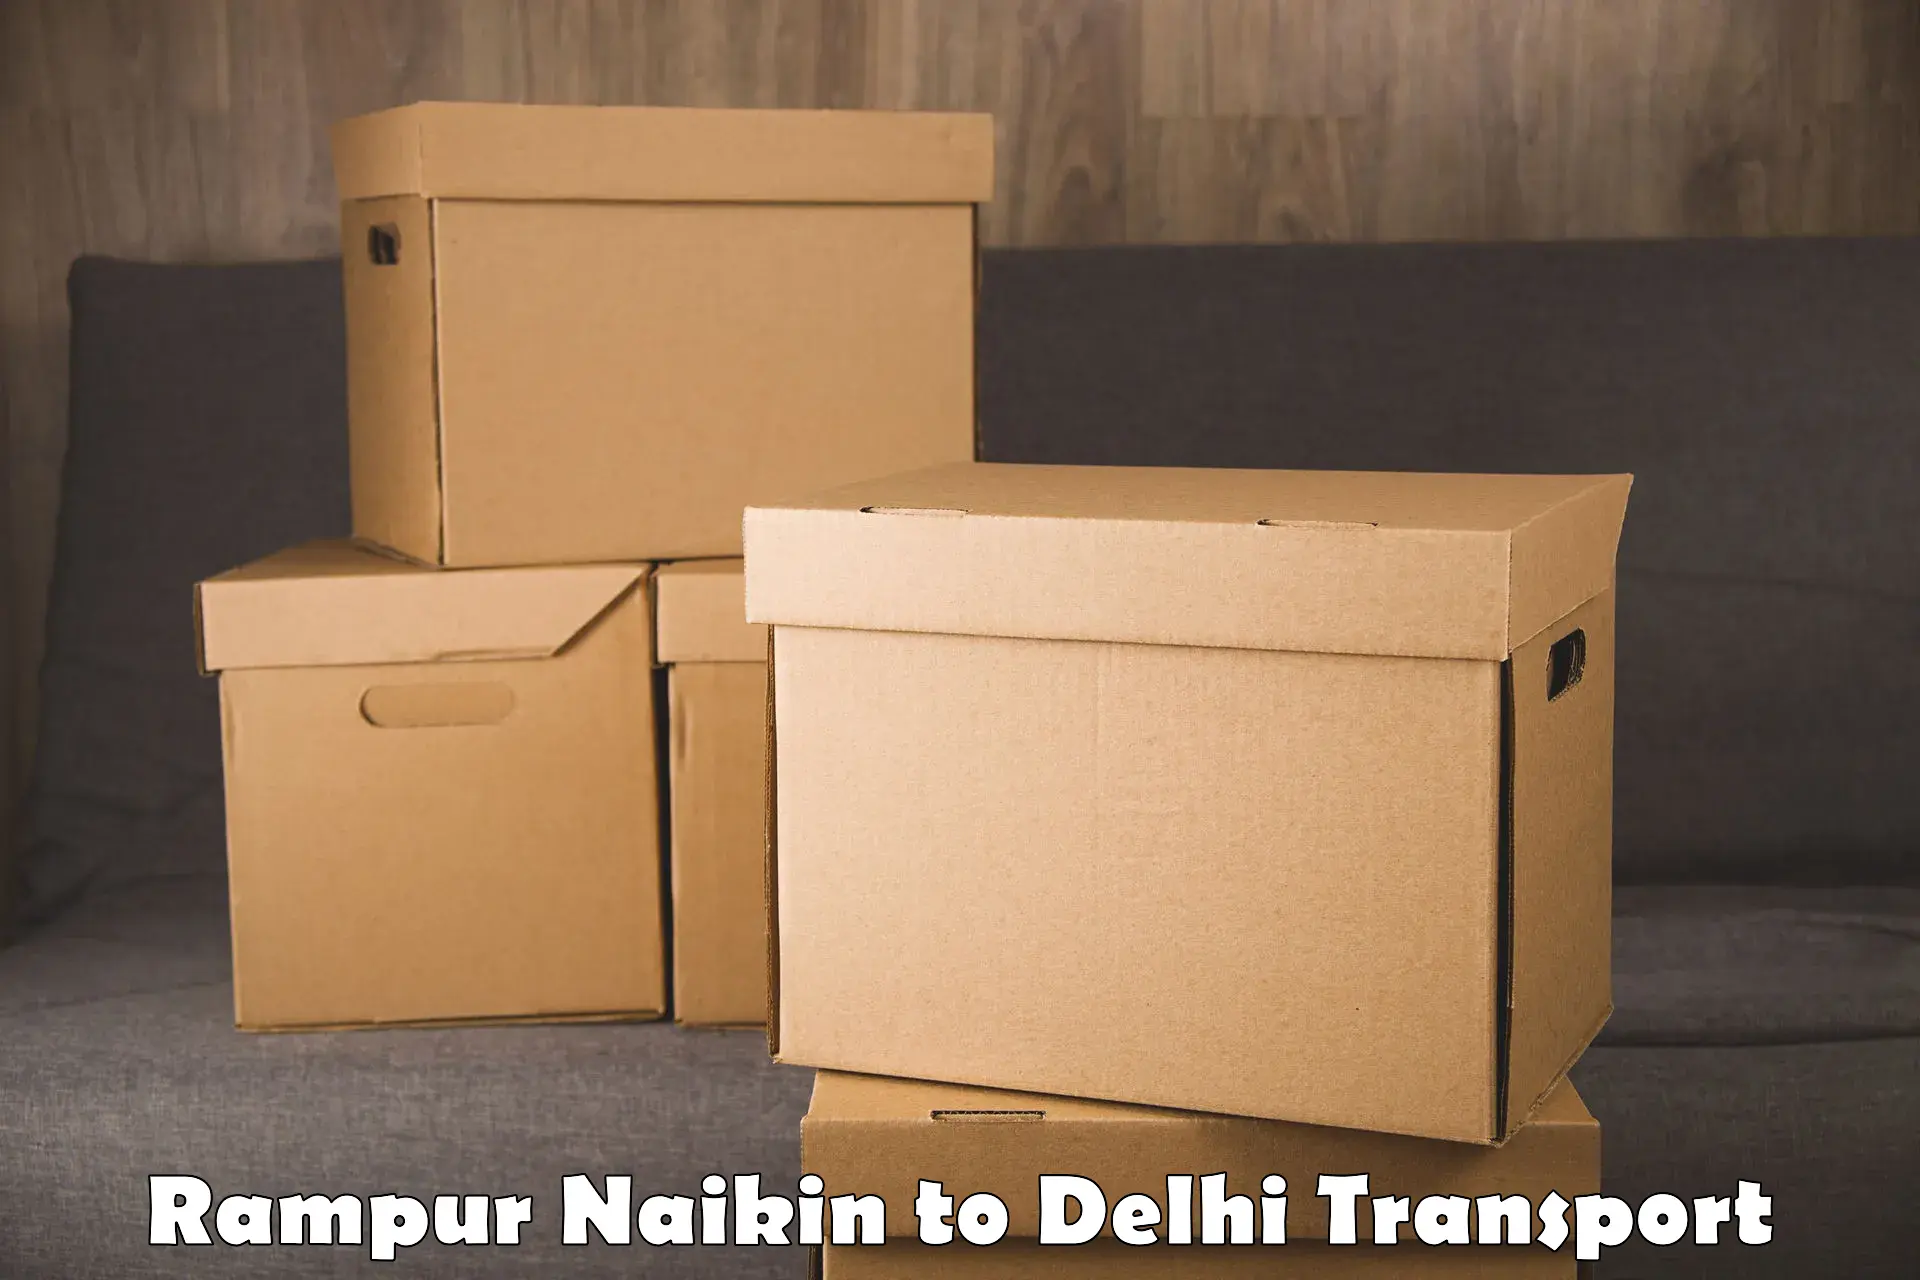 Road transport online services Rampur Naikin to NCR